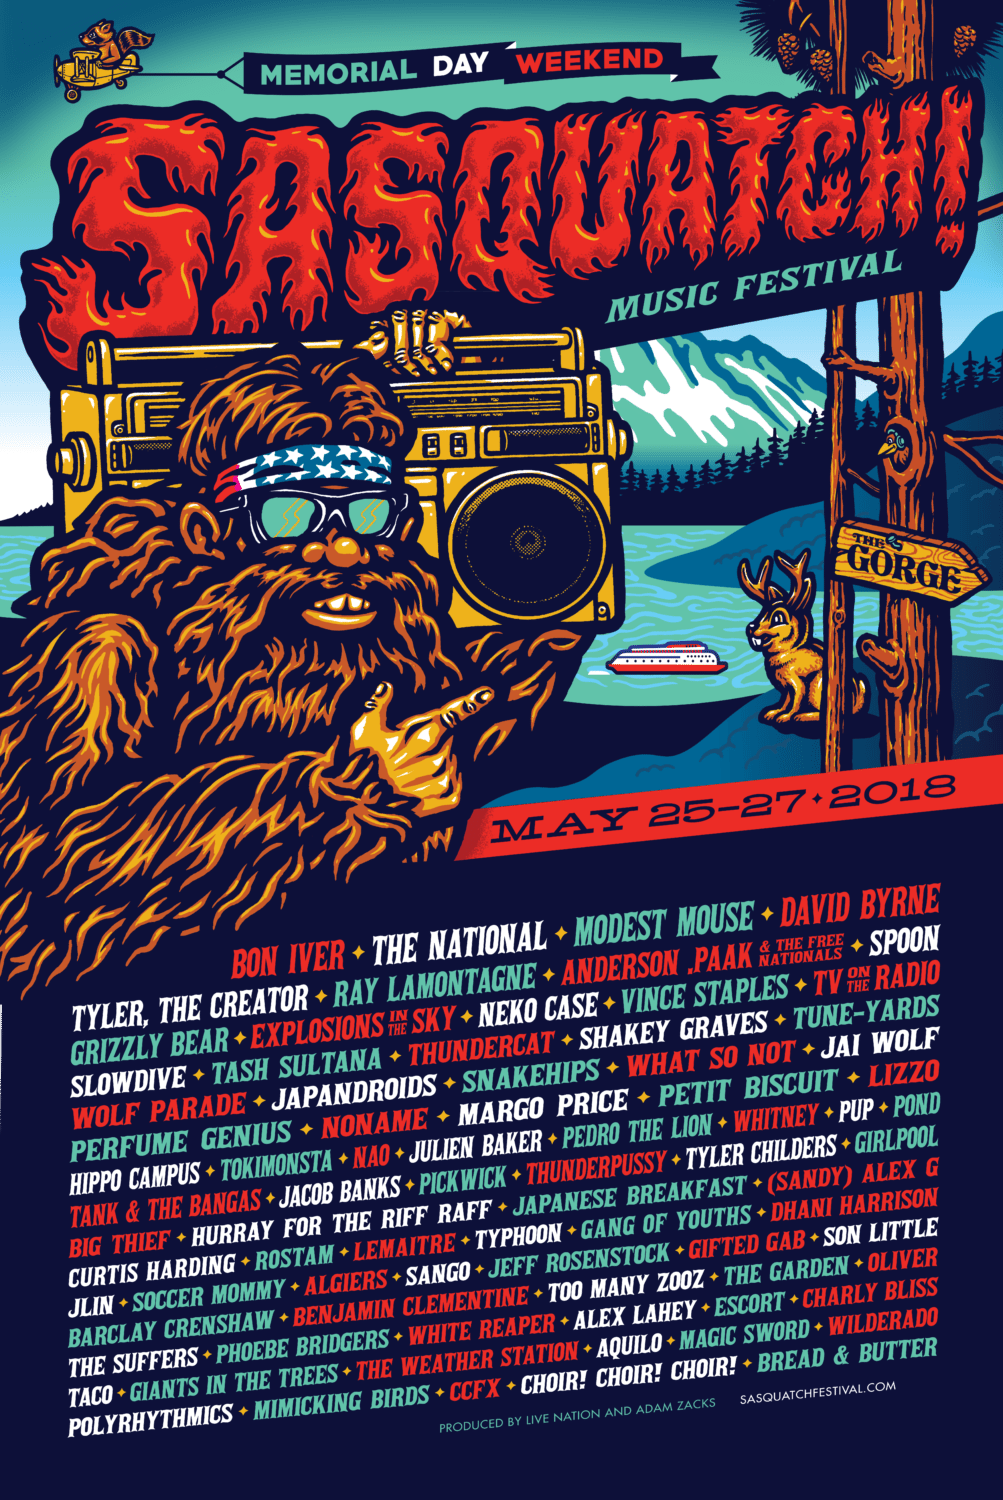 Sasquatch Festival Is Going Down At The Gorge Amphitheater Memorial Day Weekend